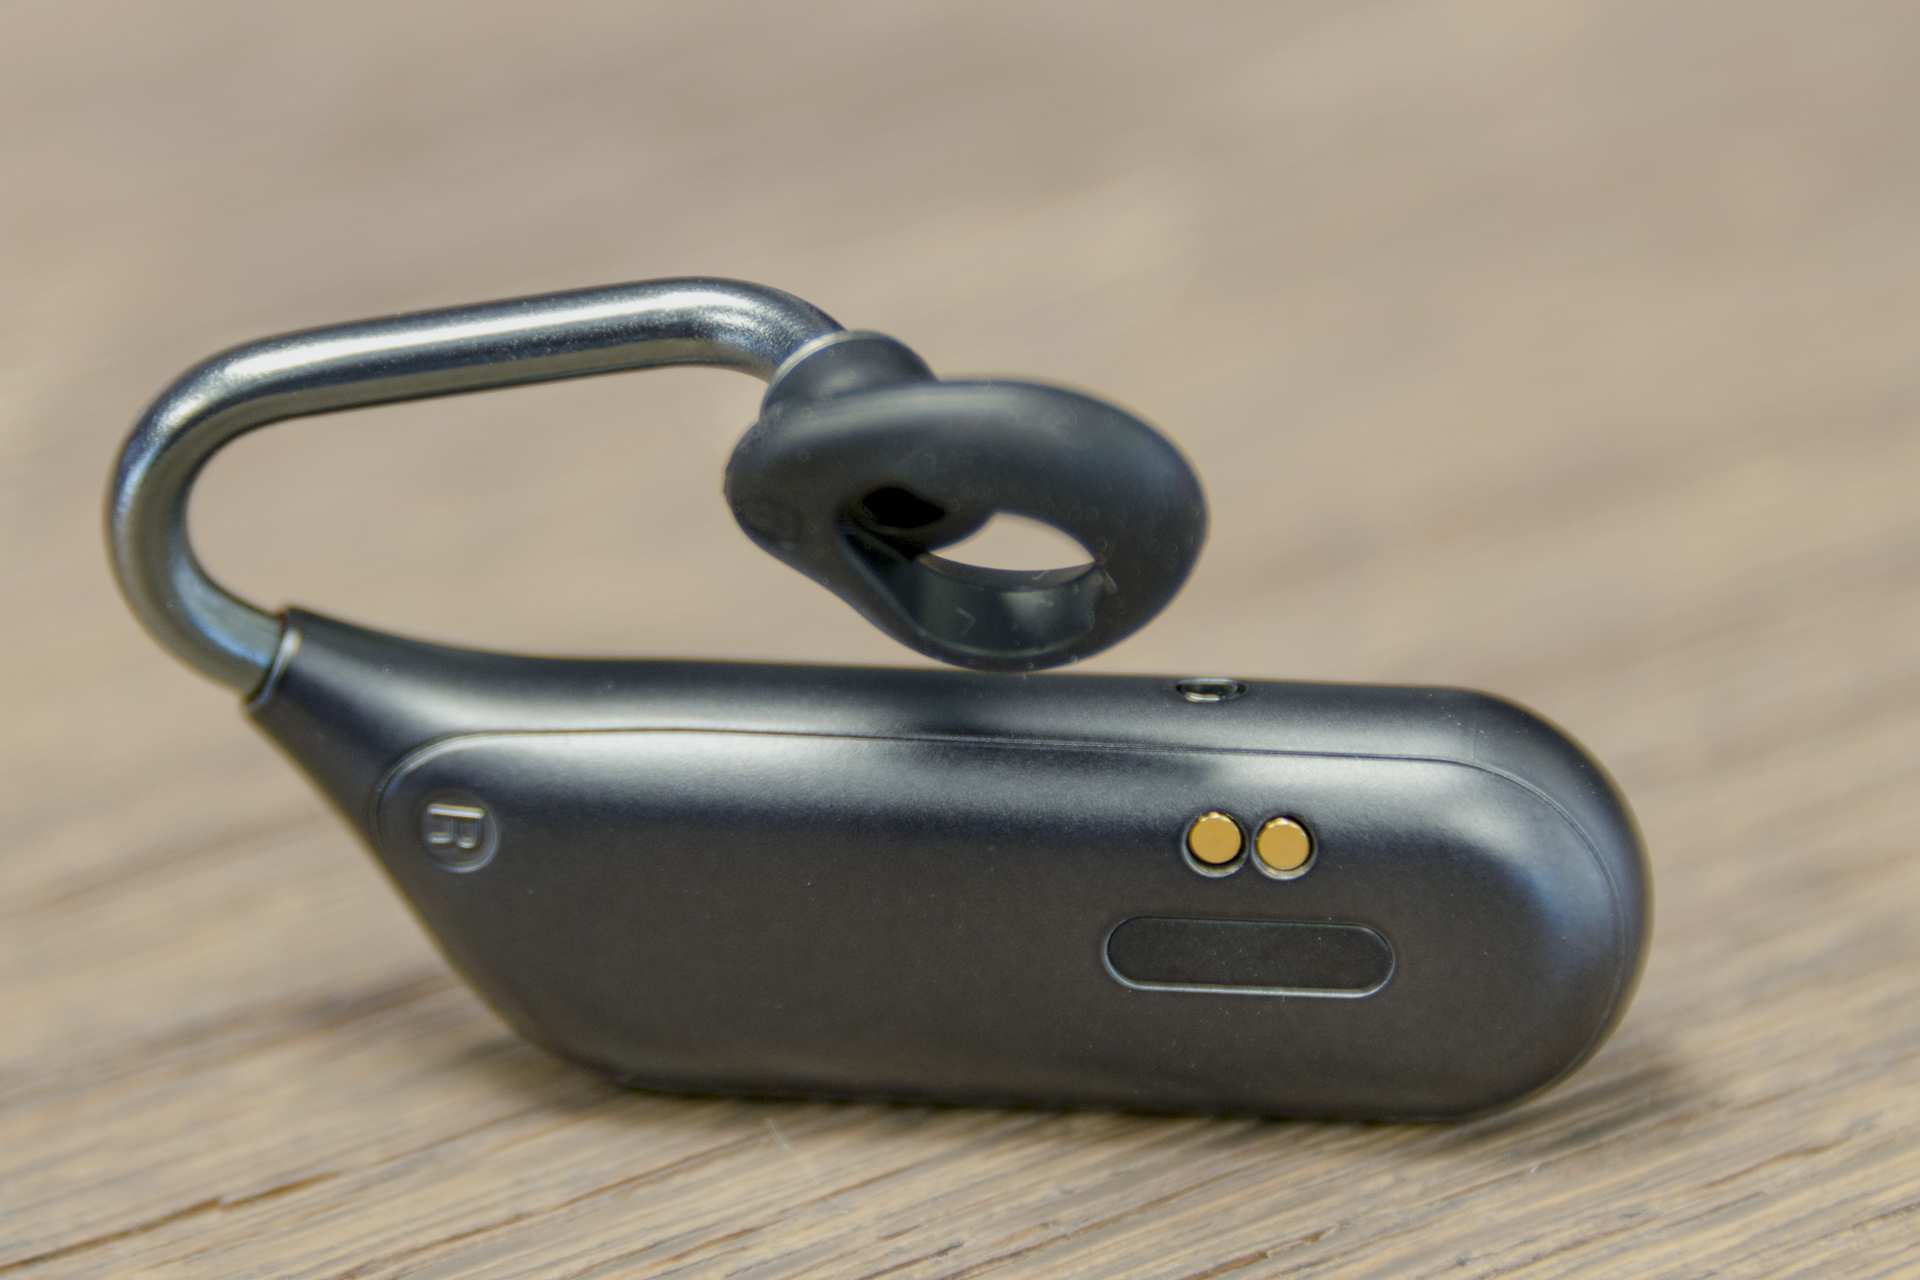 Sony Xperia Ear Duo Review | Digital Trends